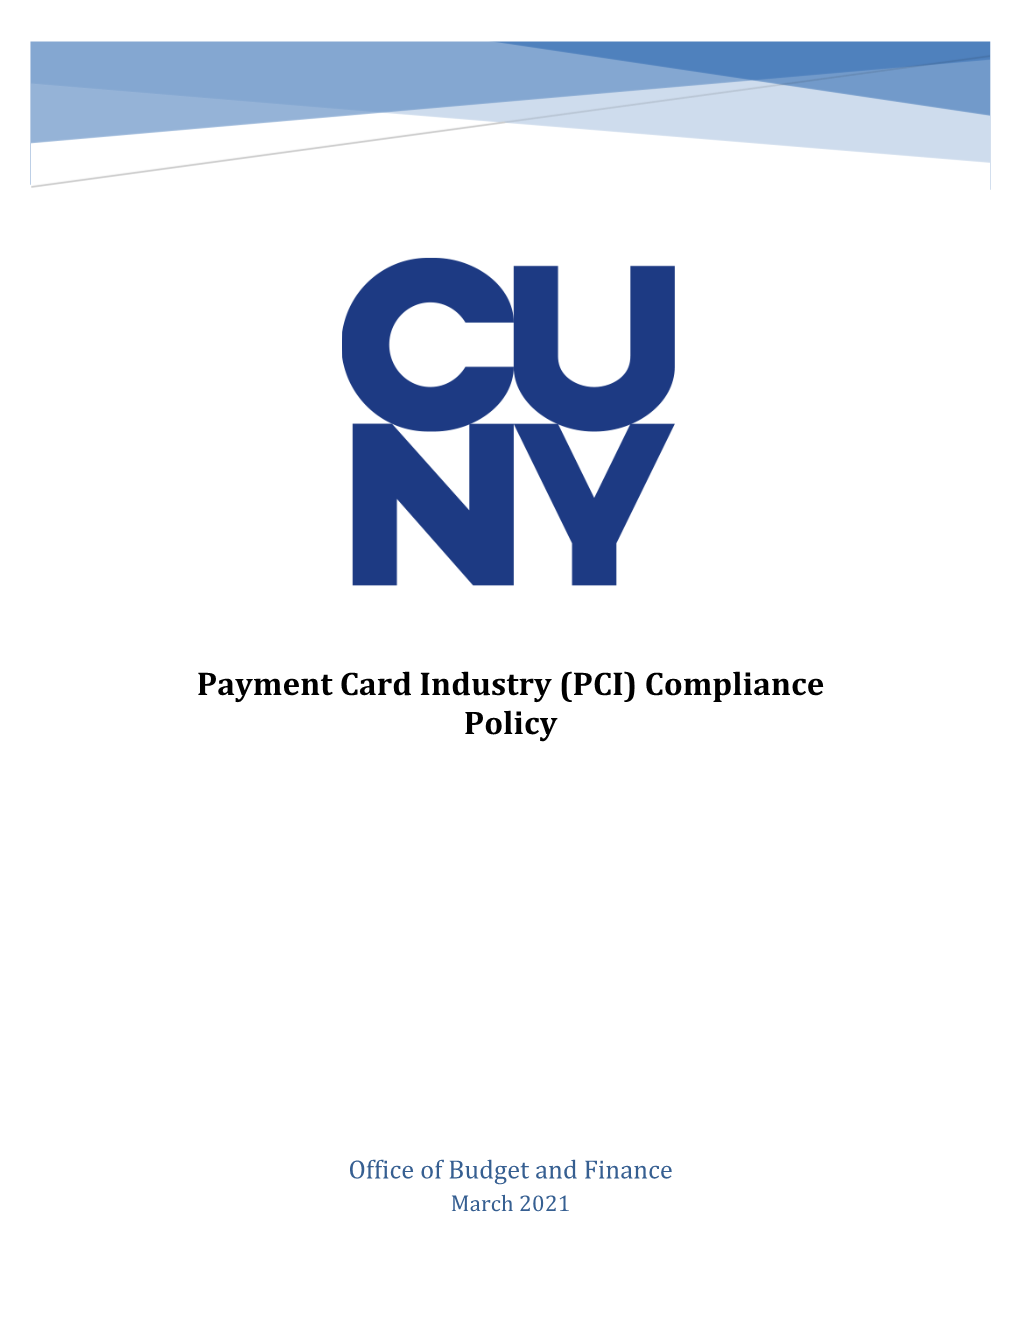 CUNY Payment Card Industry (PCI) Compliance Policy